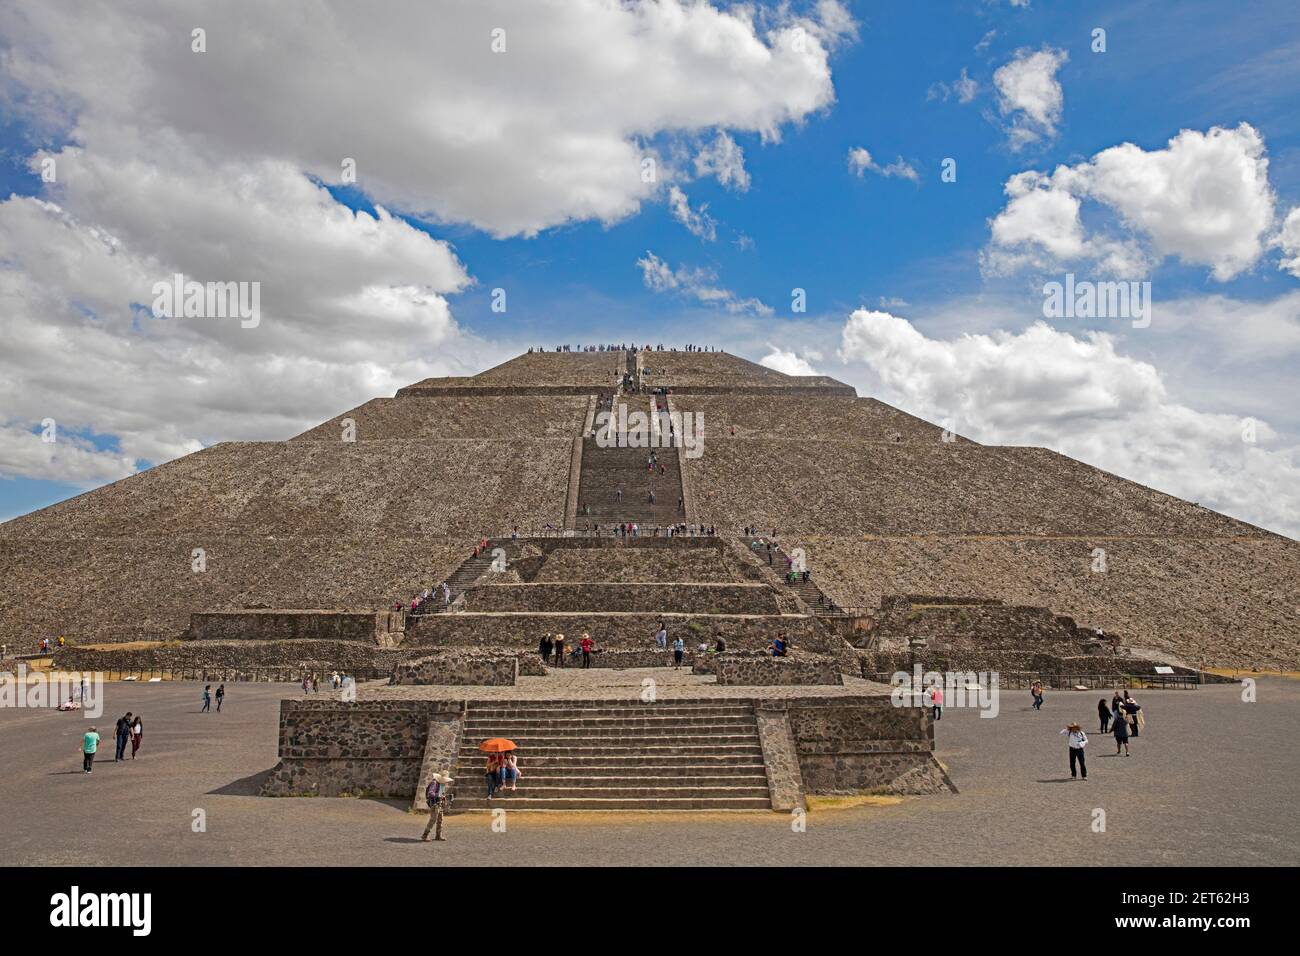 Pyramid of the Sun, Pirámide del Sol, in Teotihuacán, one of the largest pyramids in the world, Mexico Stock Photo